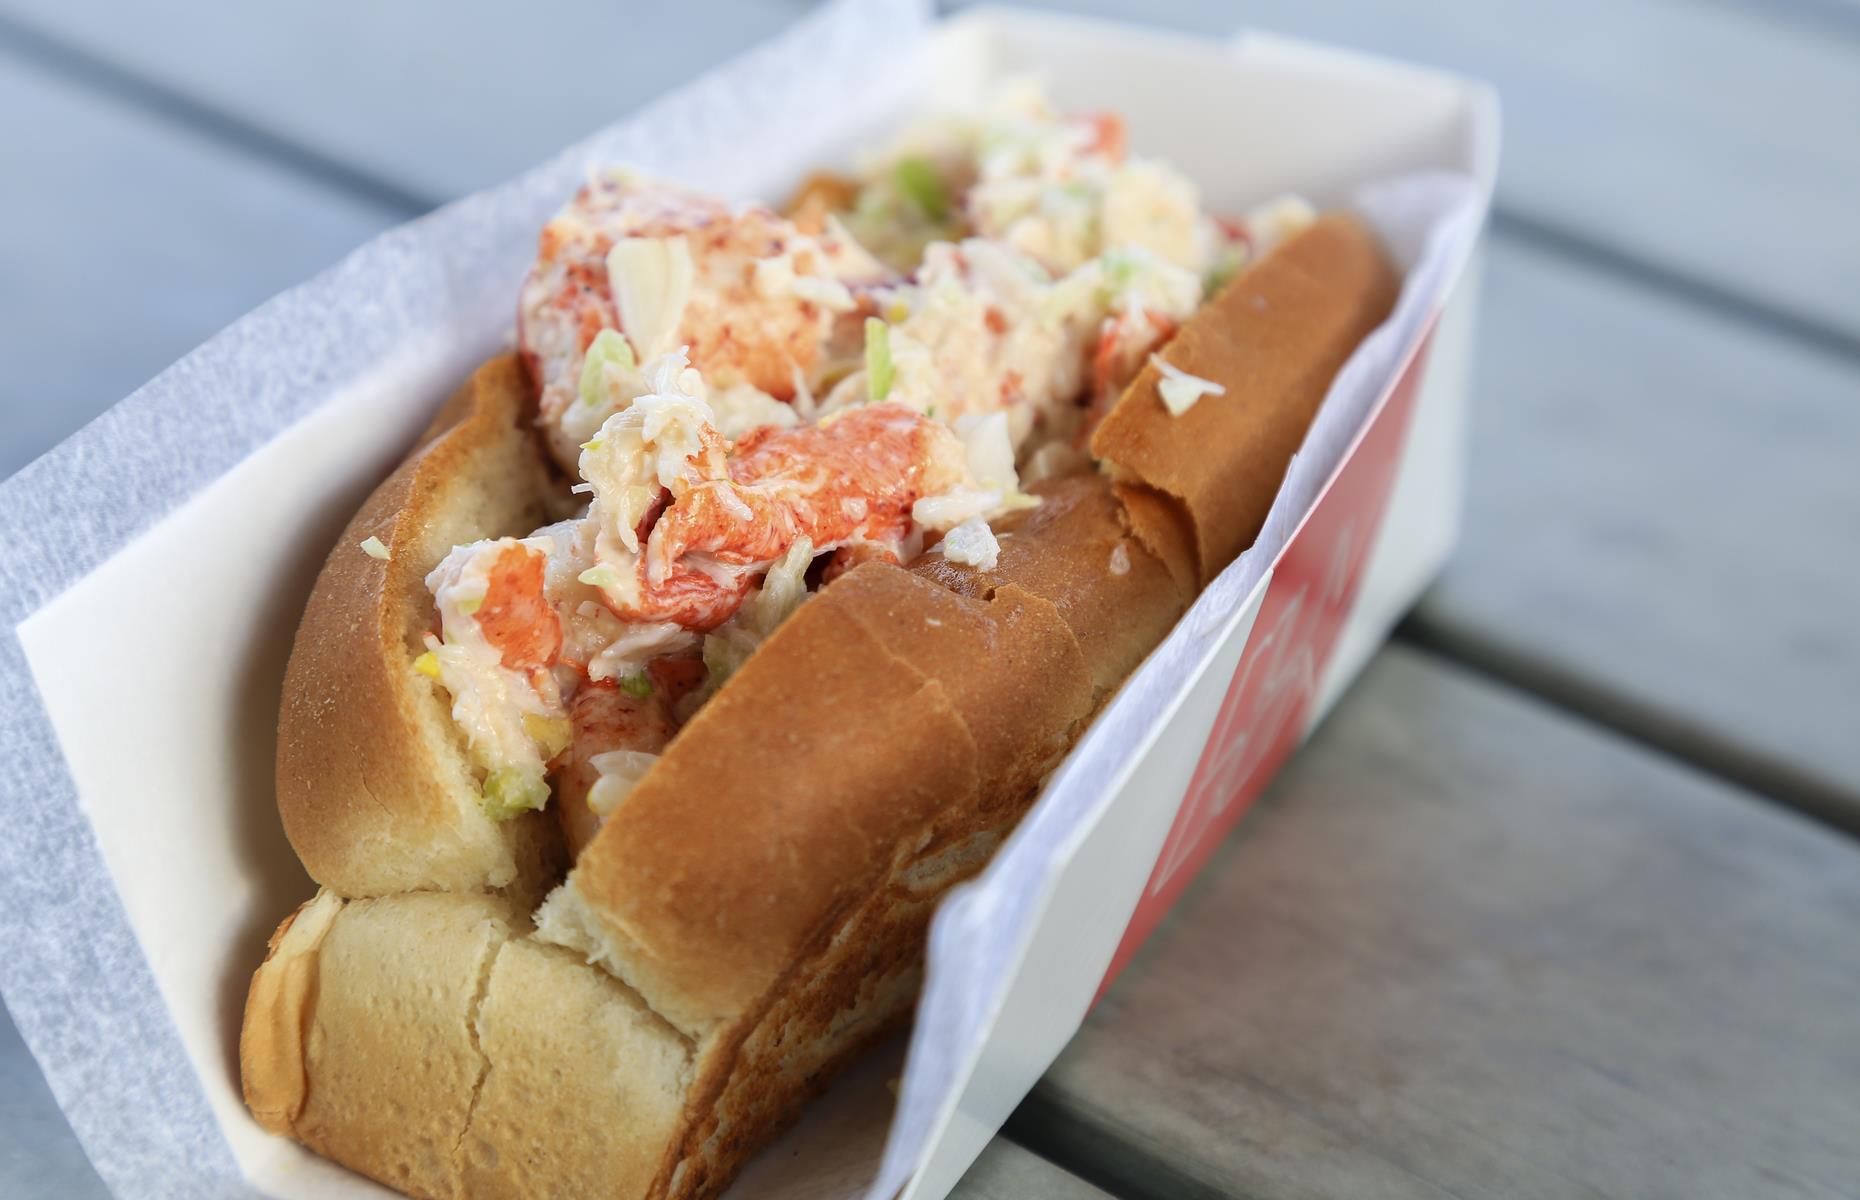 <p>If you only eat one thing while traveling down Maine’s southern coast, make it a lobster roll (or two). The tender meat is served in soft, slightly chewy rolls and drenched in melted butter and it’s as addictive as it sounds. Find them anywhere from waterside restaurants to tiny roadside shacks like legendary Wiscasset spot <a href="https://www.redseatsmaine.com/">Red’s Eats</a>, which promises “at least” one whole lobster per roll.</p>